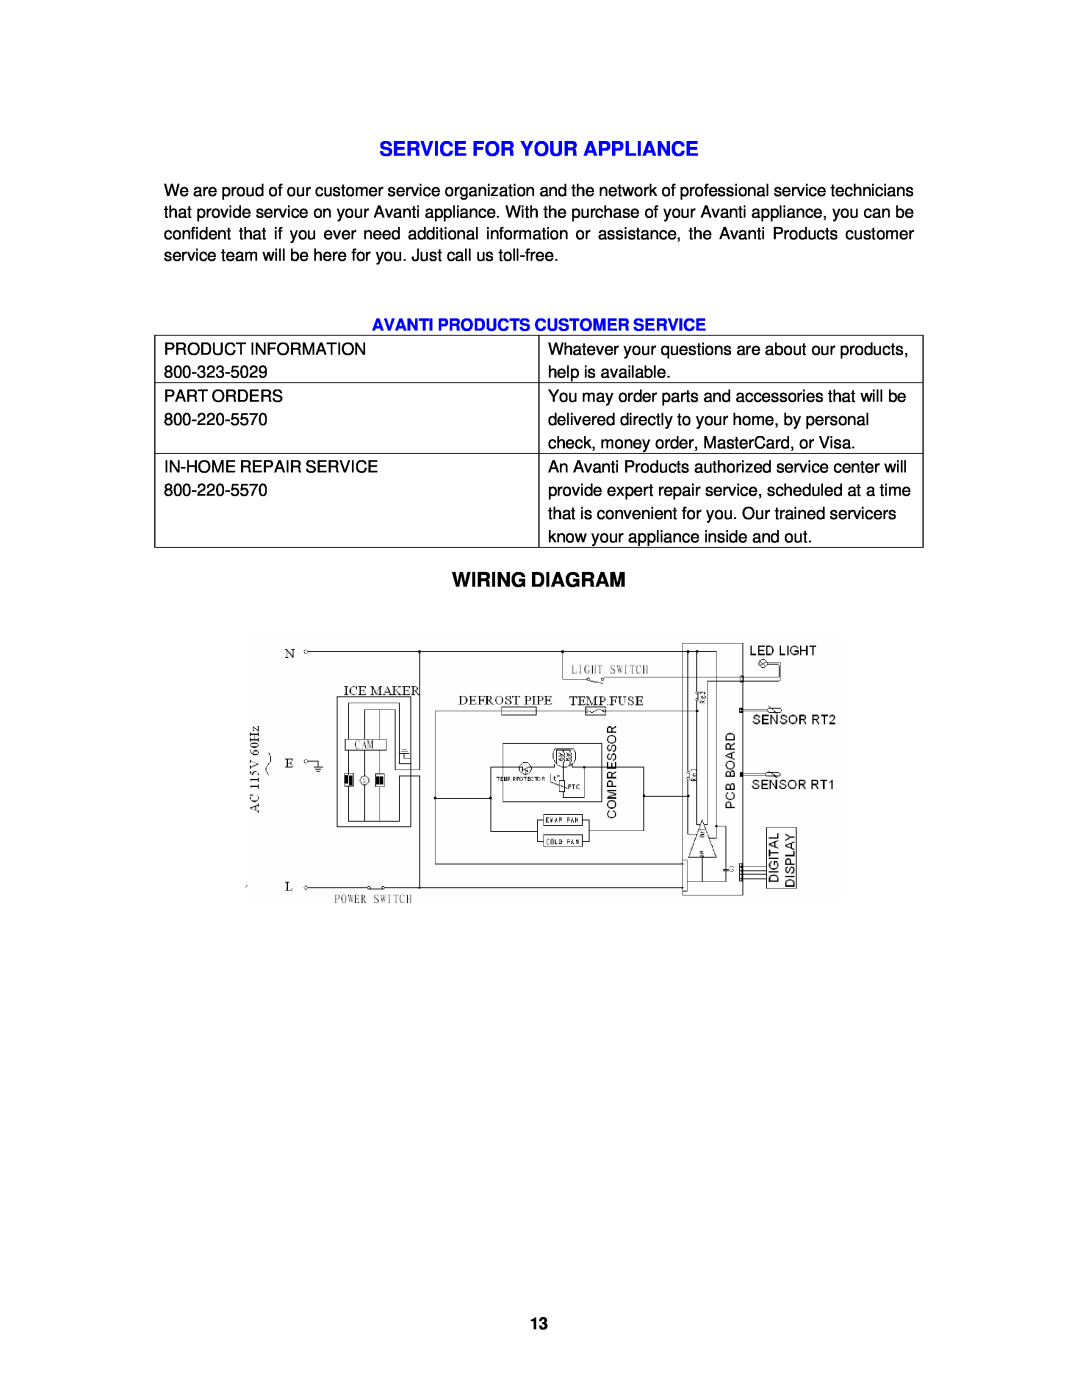 Avanti IMR28SS instruction manual Service For Your Appliance, Wiring Diagram 